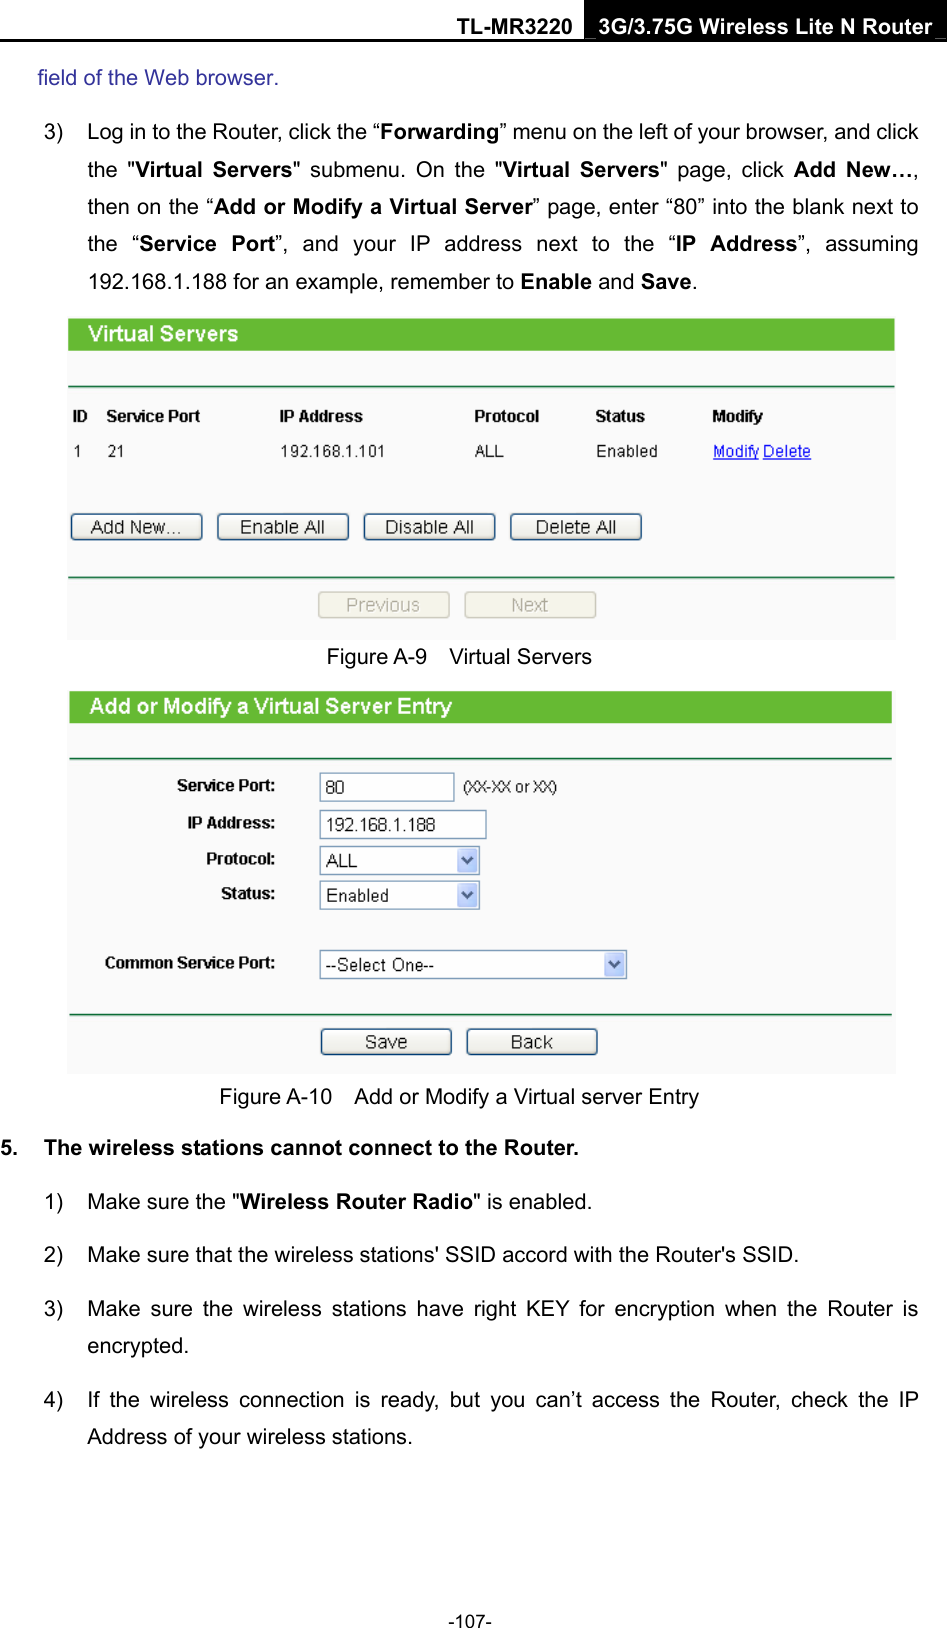 TL-MR3220 3G/3.75G Wireless Lite N Router -107- field of the Web browser. 3)  Log in to the Router, click the “Forwarding” menu on the left of your browser, and click the &quot;Virtual Servers&quot; submenu. On the &quot;Virtual Servers&quot; page, click Add New…, then on the “Add or Modify a Virtual Server” page, enter “80” into the blank next to the “Service Port”, and your IP address next to the “IP Address”, assuming 192.168.1.188 for an example, remember to Enable and Save.  Figure A-9  Virtual Servers  Figure A-10    Add or Modify a Virtual server Entry 5.  The wireless stations cannot connect to the Router. 1)  Make sure the &quot;Wireless Router Radio&quot; is enabled. 2)  Make sure that the wireless stations&apos; SSID accord with the Router&apos;s SSID. 3)  Make sure the wireless stations have right KEY for encryption when the Router is encrypted. 4)  If the wireless connection is ready, but you can’t access the Router, check the IP Address of your wireless stations.  